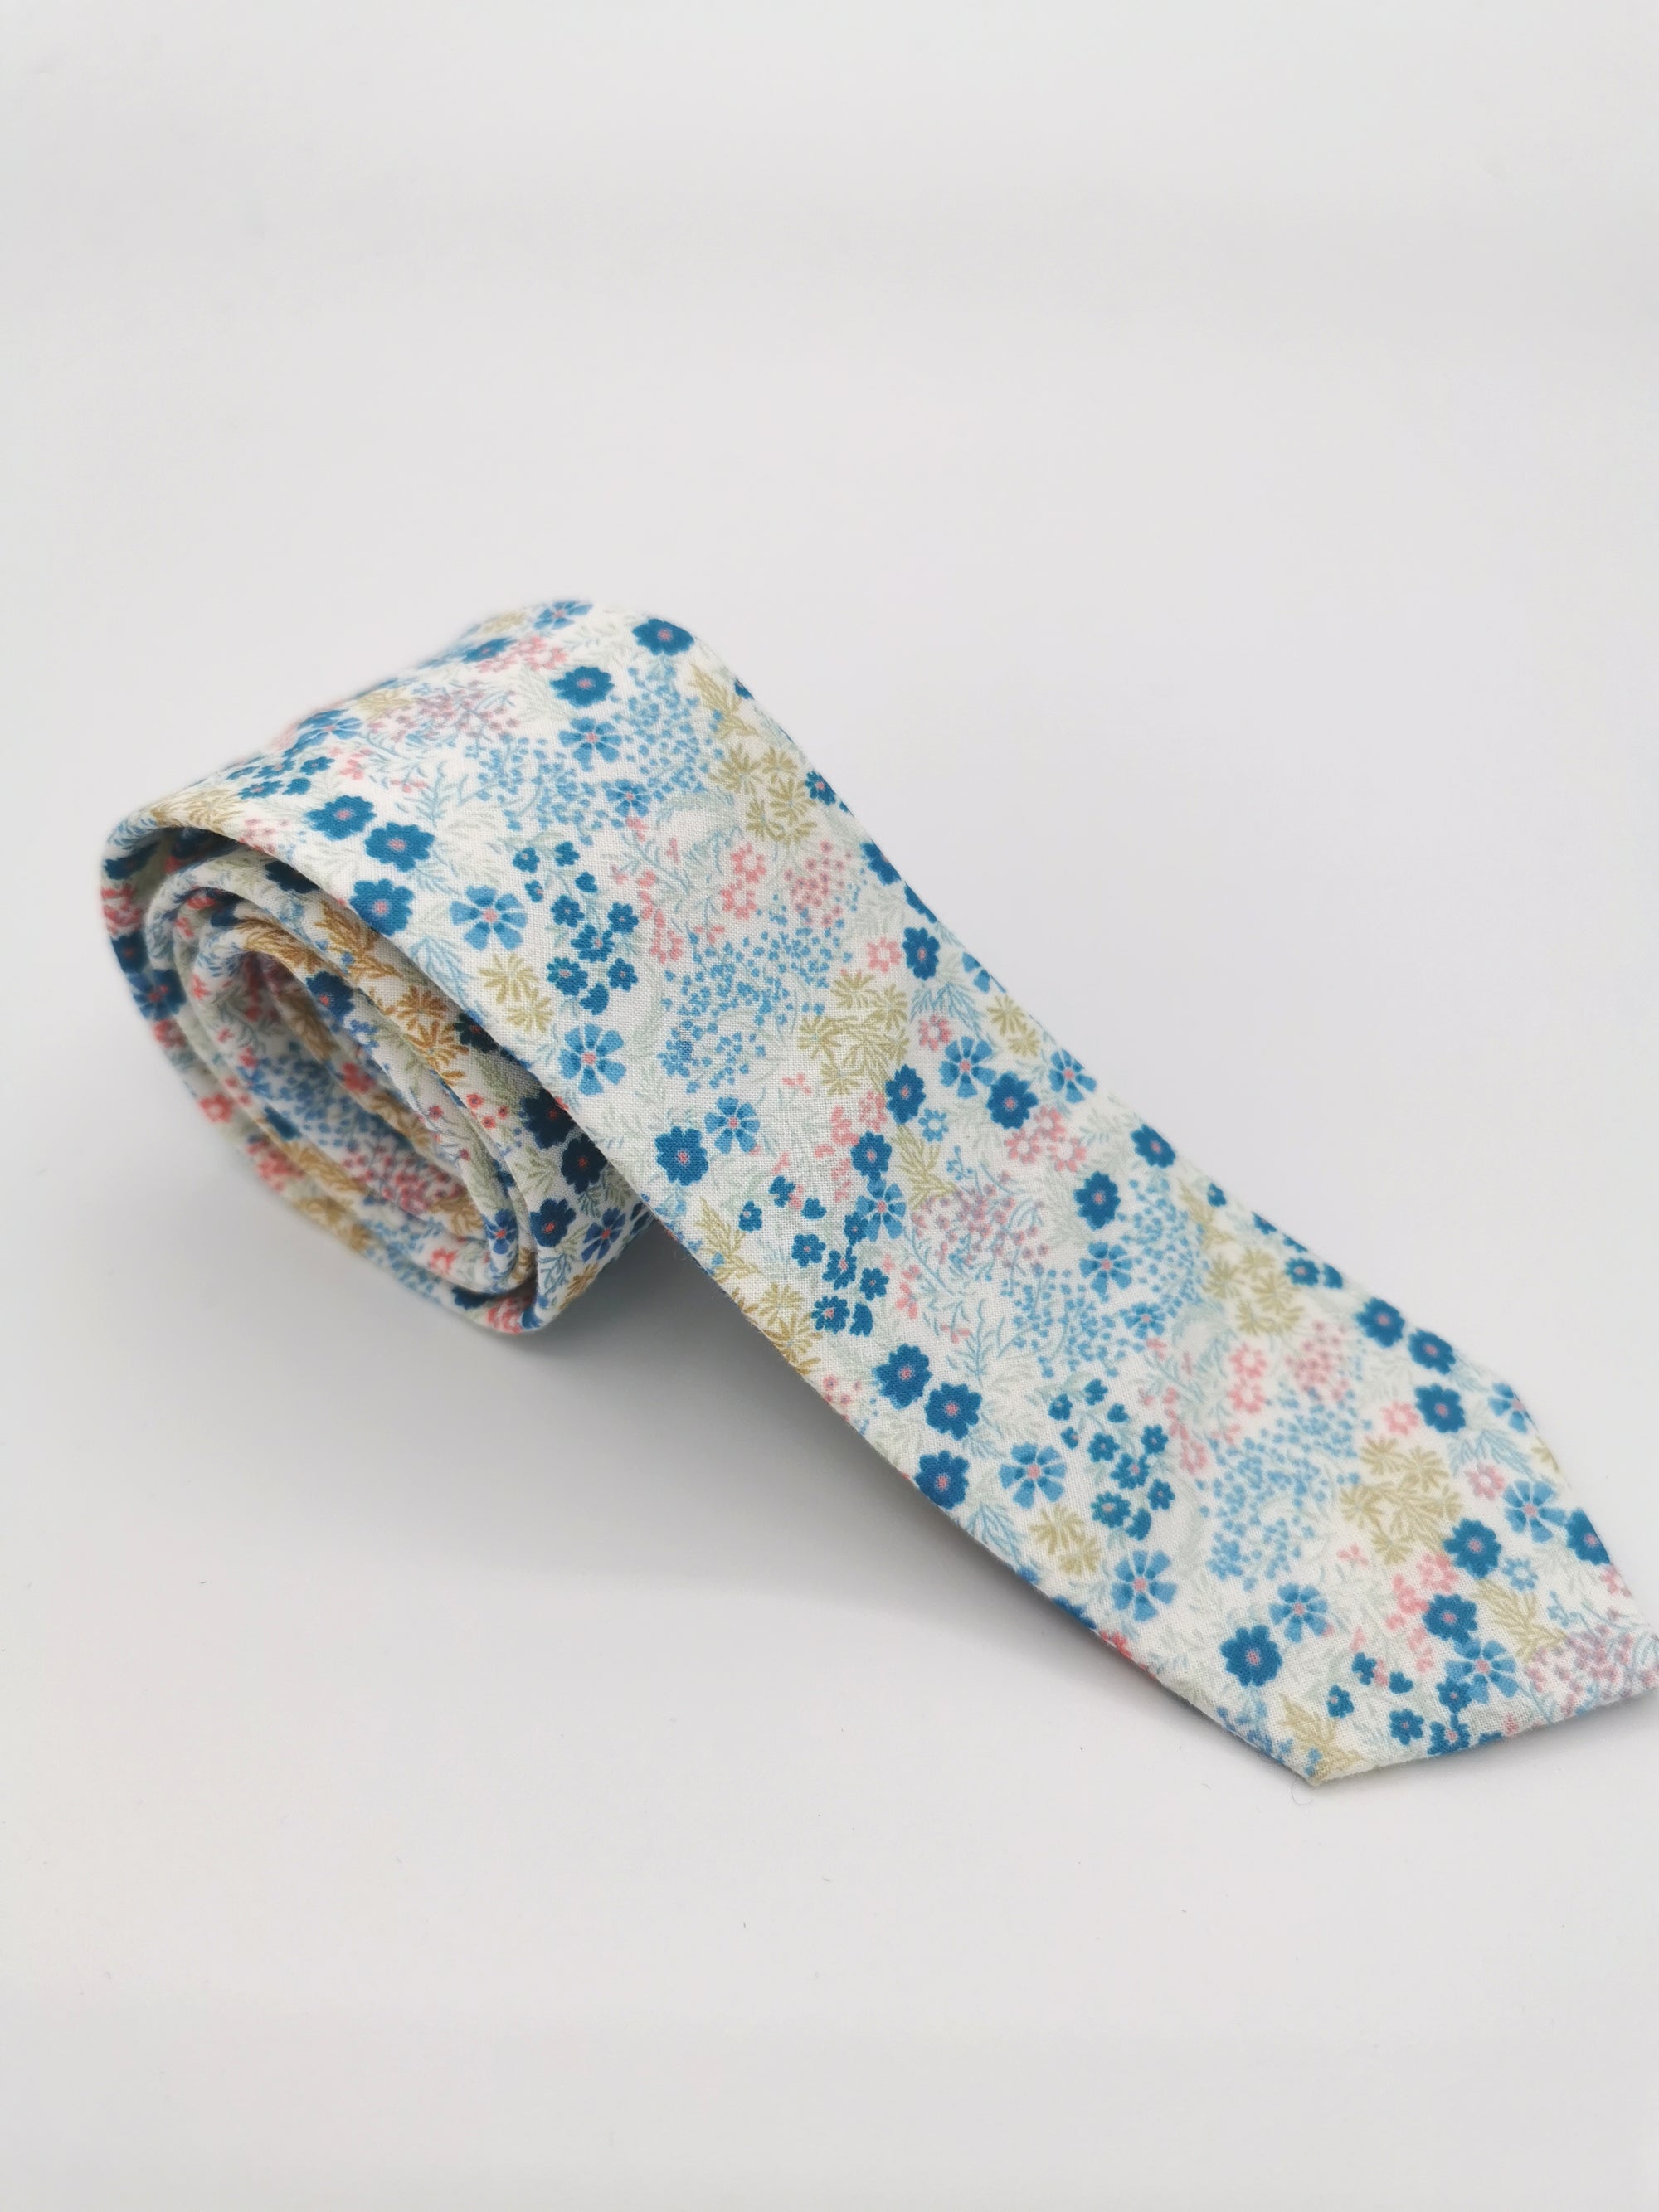 Fine cotton tie with light blue and pink floral pattern